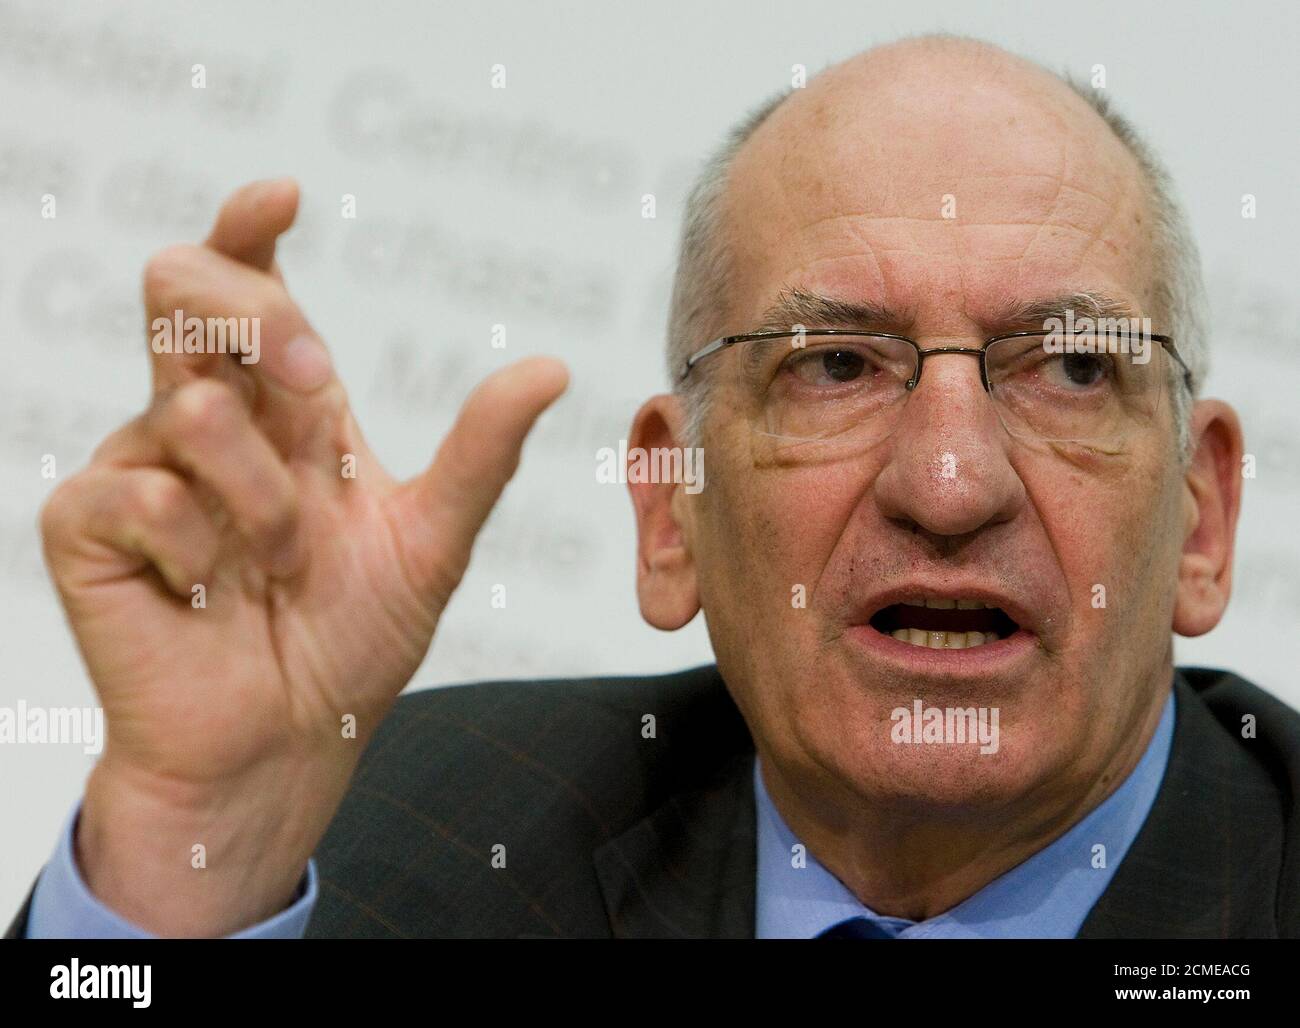 Swiss Interior Minister Pascal Couchepin gestures during a news conference on the popular vote ' Yes to the complementary medicine' ('Ja zur Komplementaermedizin') in Bern April 9, 2009. REUTERS/Pascal Lauener (SWITZERLAND POLITICS HEADSHOT) Stock Photo